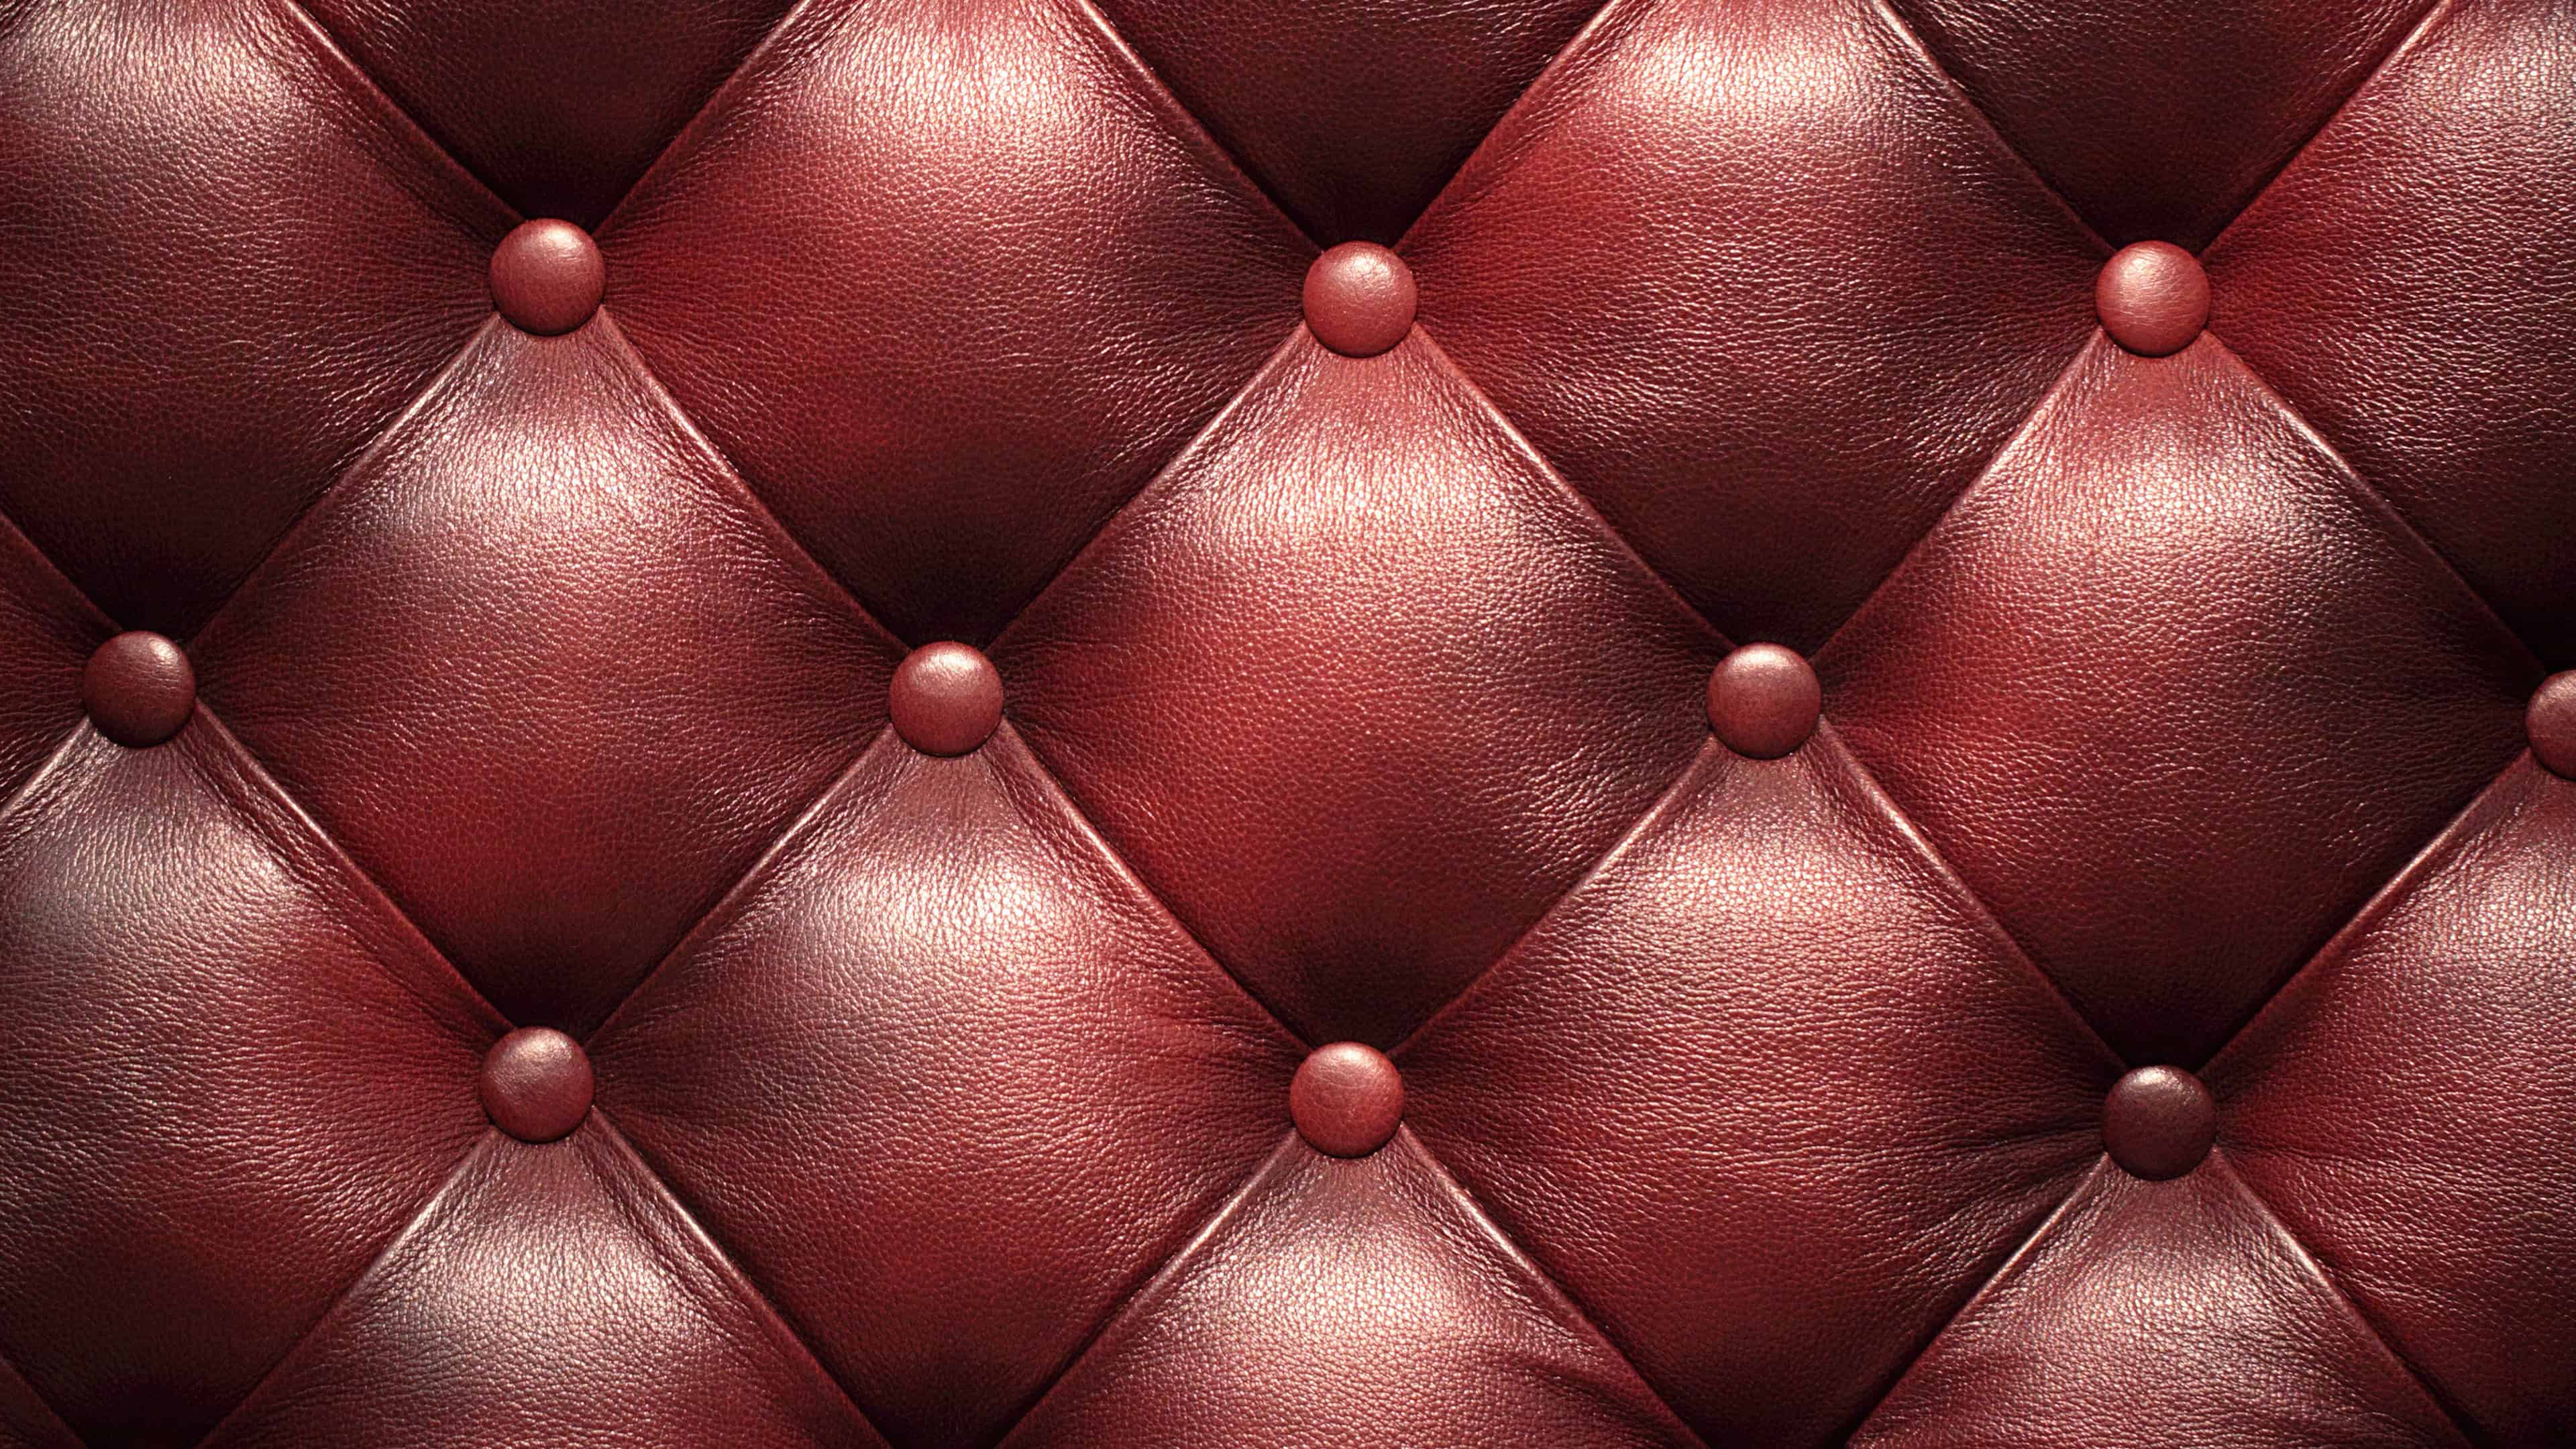 Buttoned Leather UHD 4K Wallpaper 